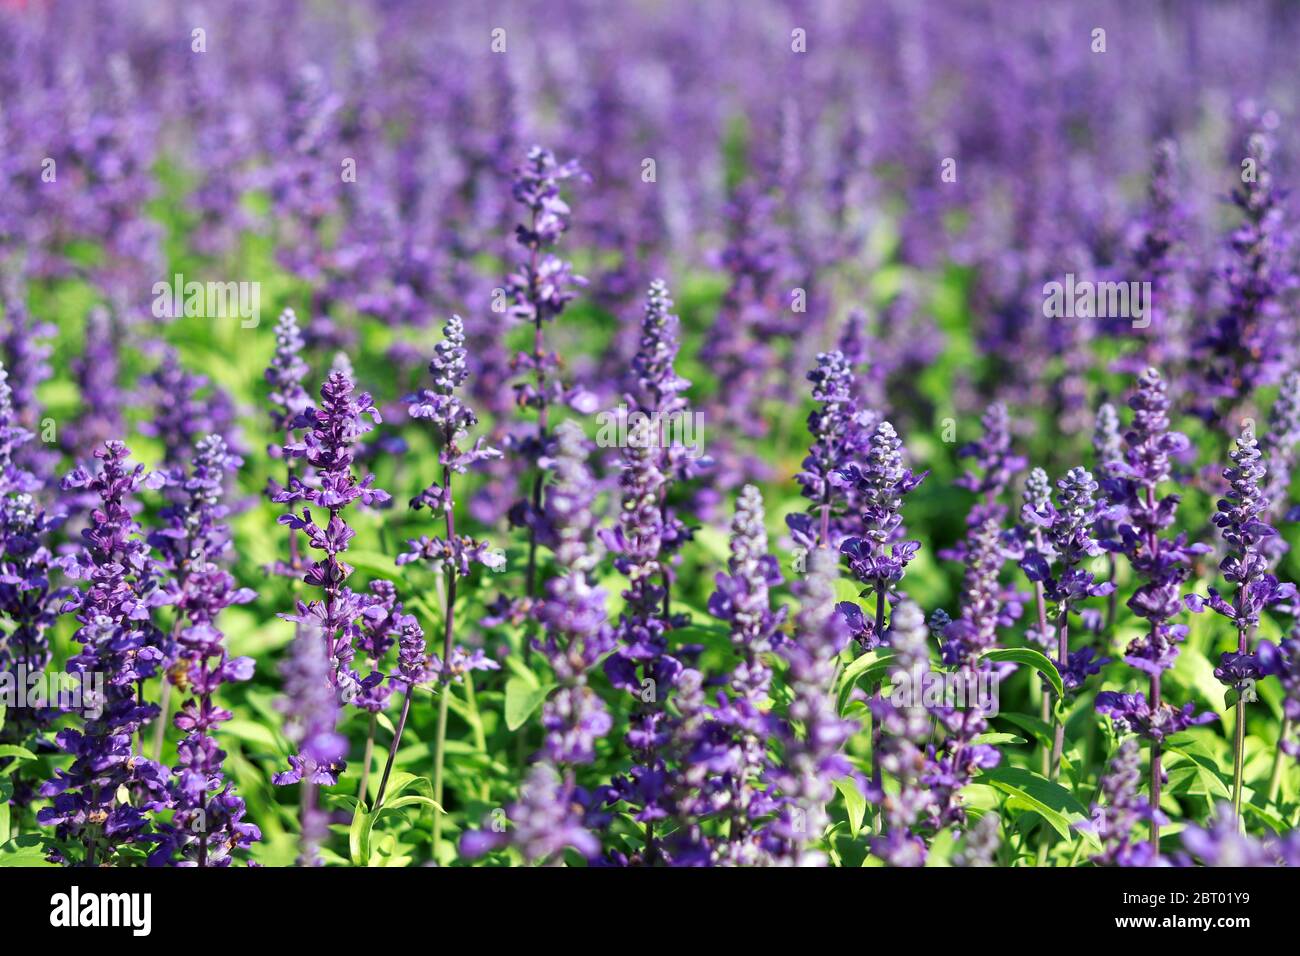 Blue salvia on the field of salvia flowers with blurred background. Stock Photo